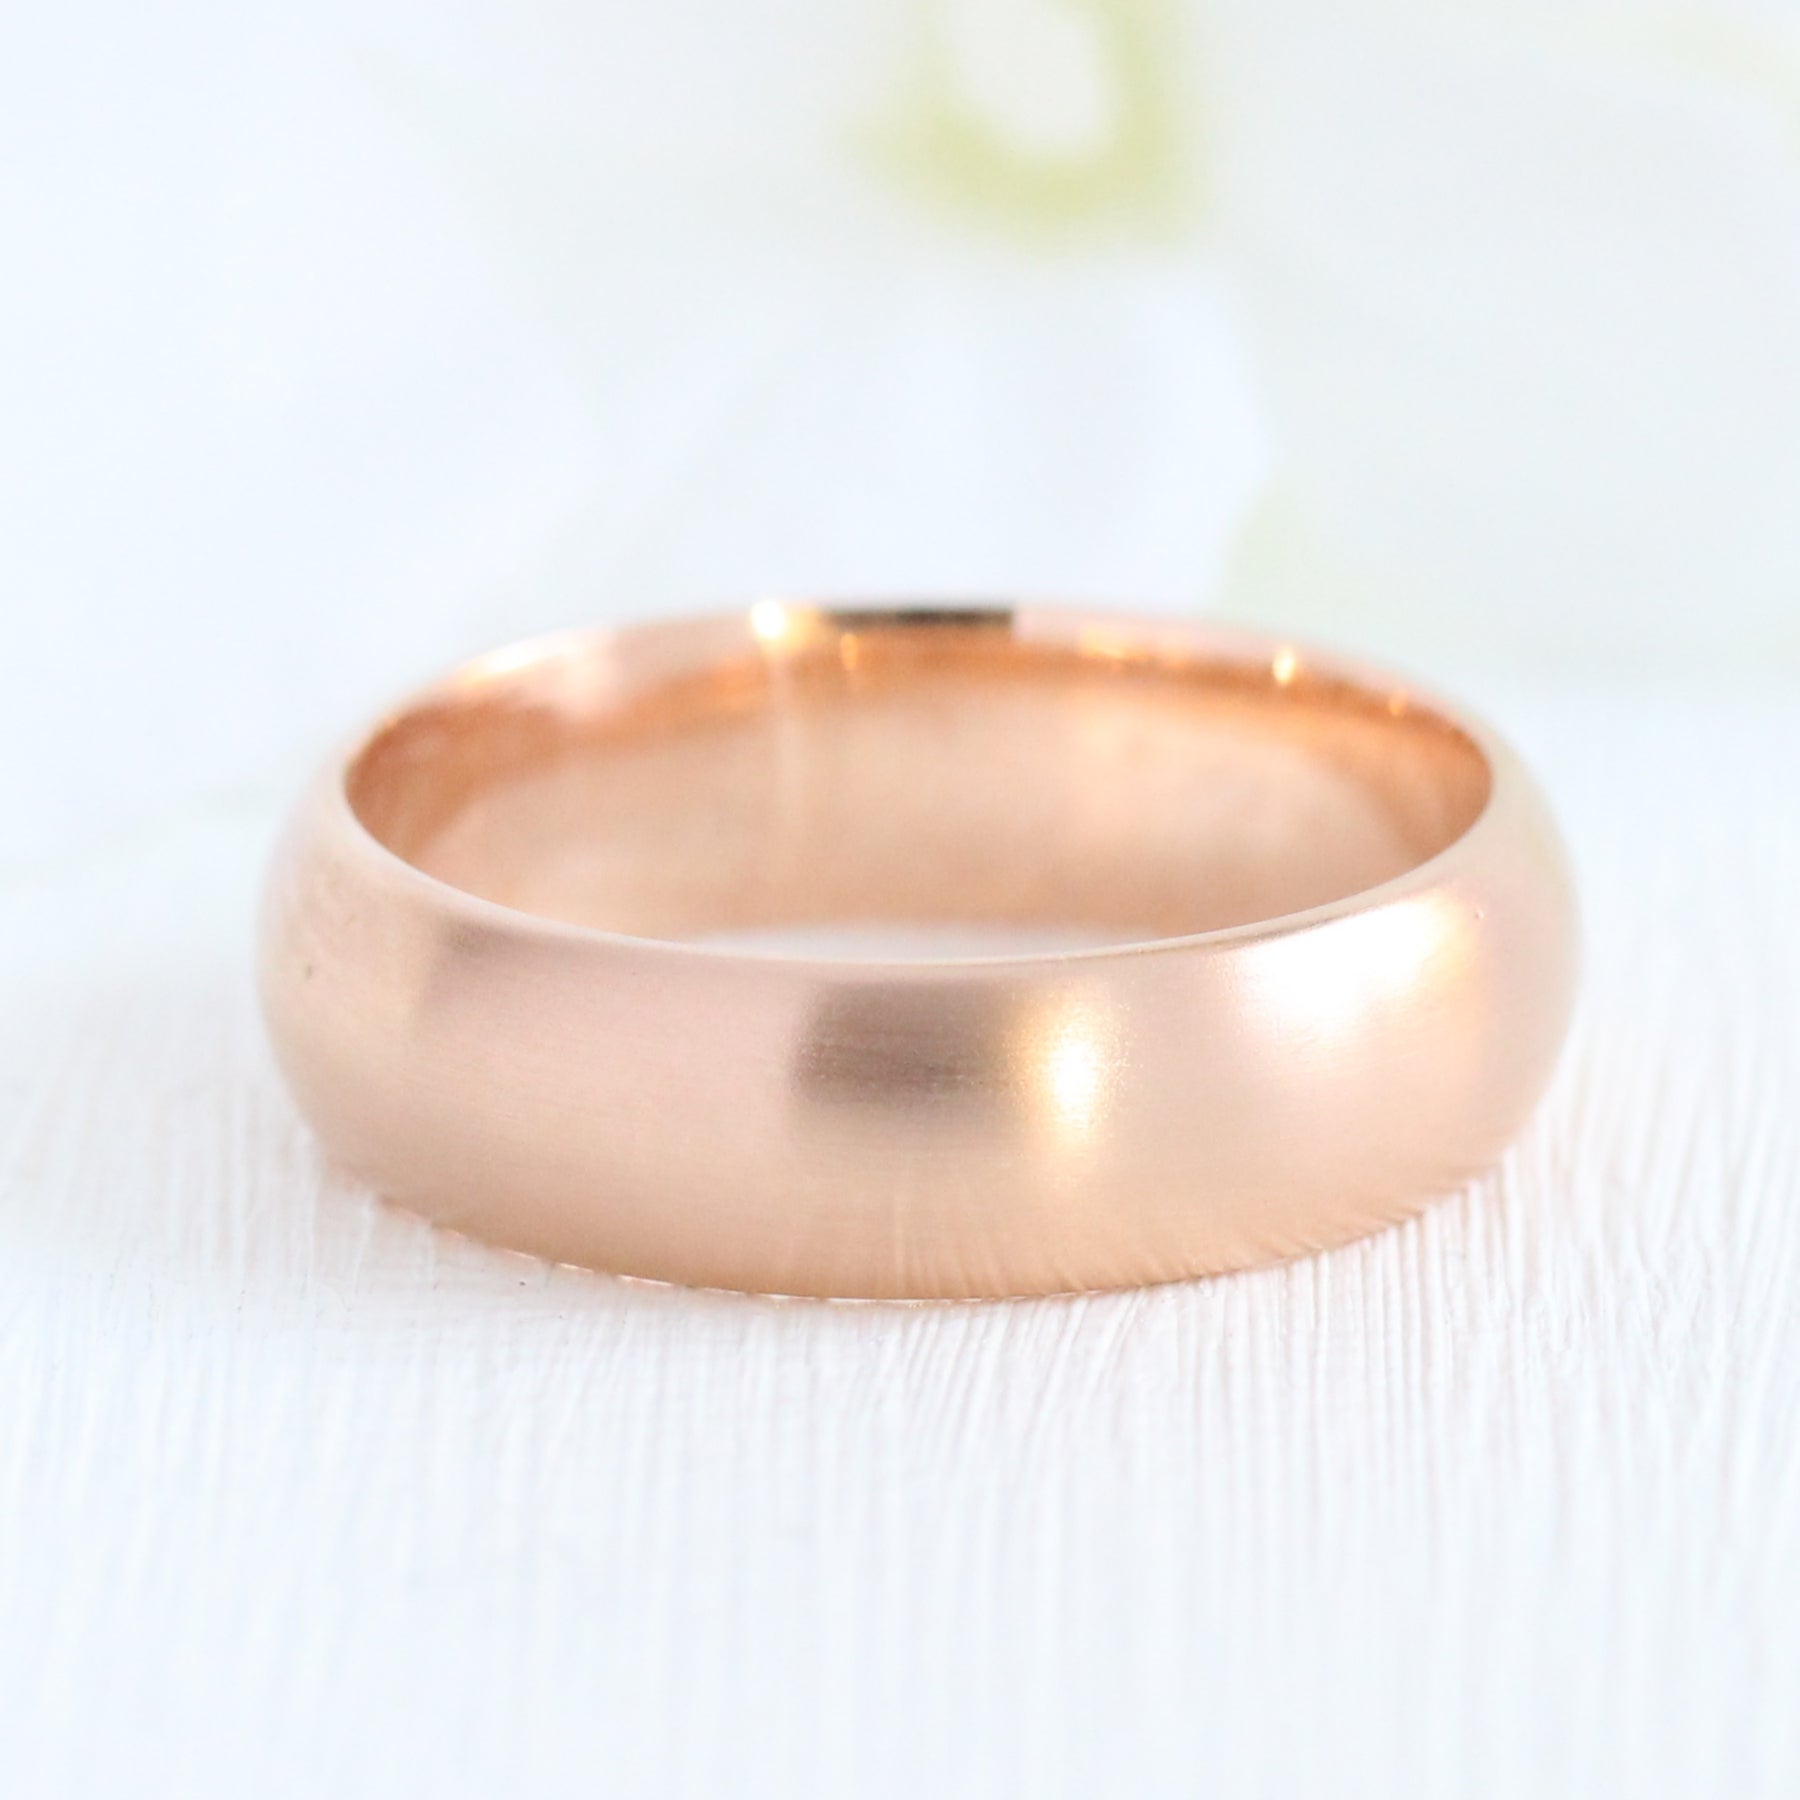 Rose Gold Ring with Distressed Texture - 9 Carat